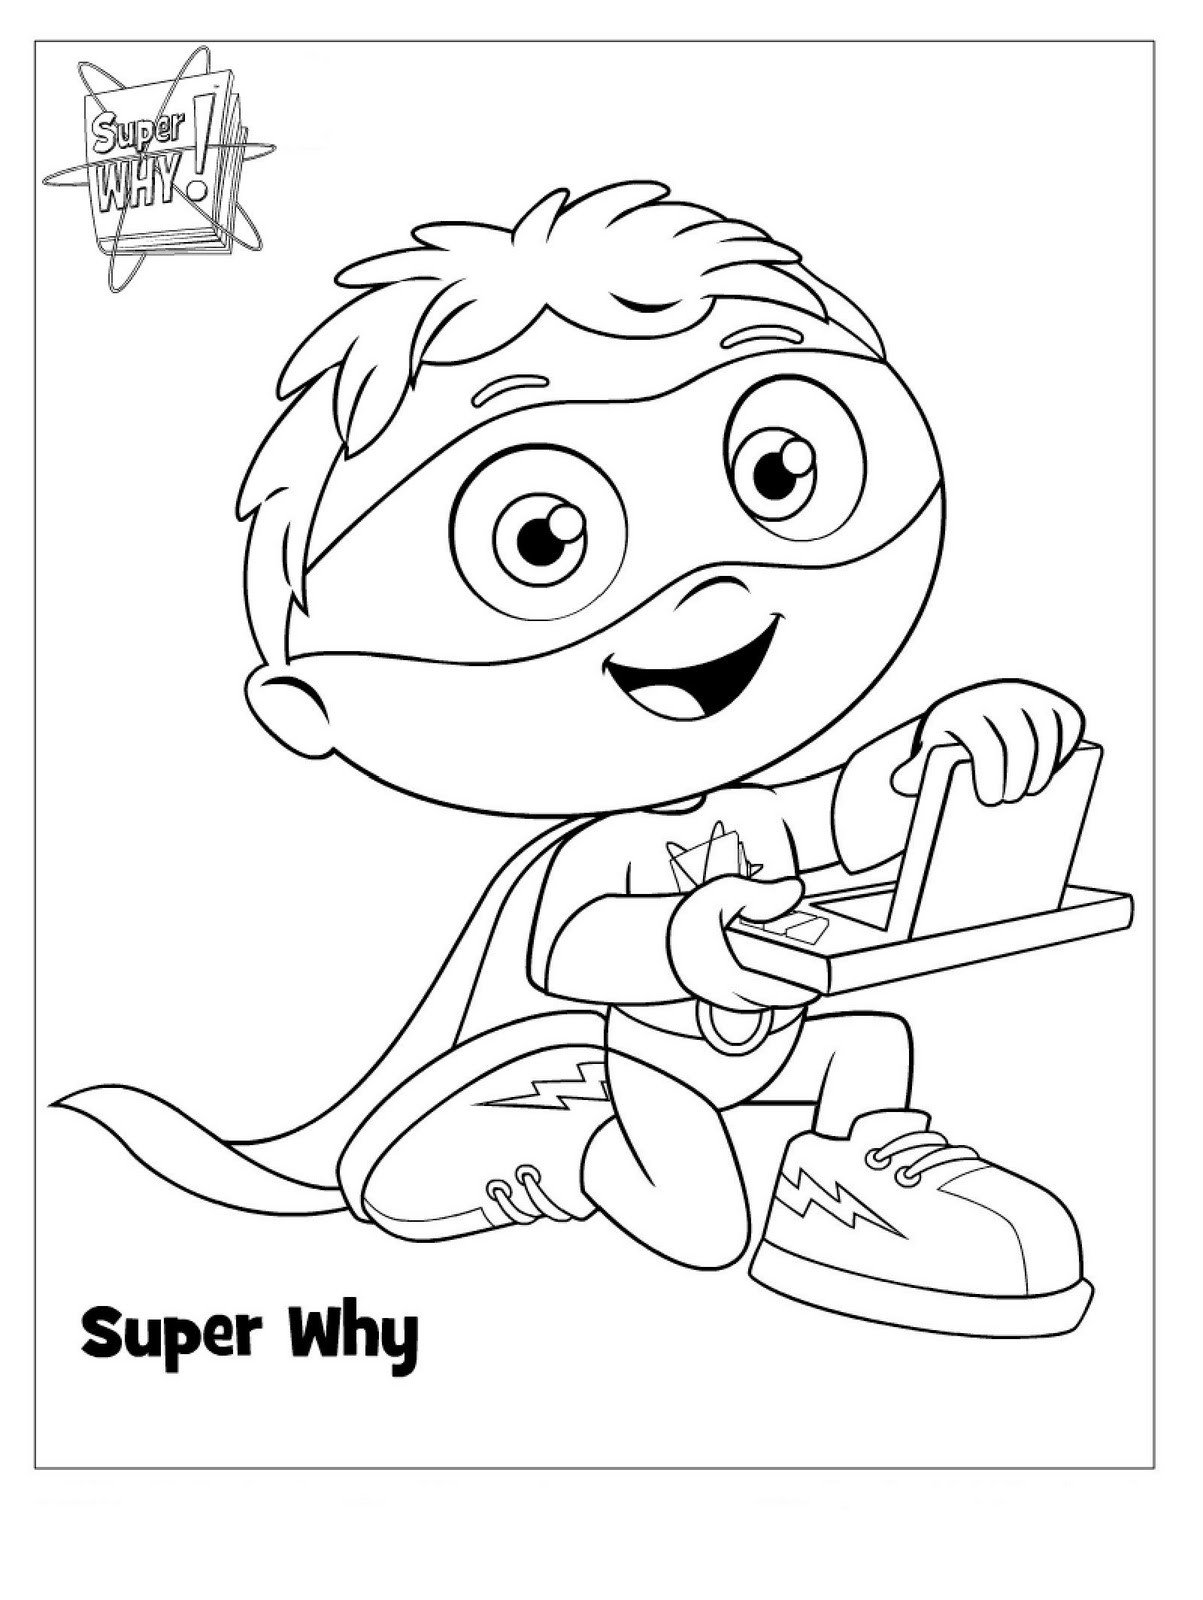 Toddler Coloring Sheet
 Super Why Coloring Pages Best Coloring Pages For Kids